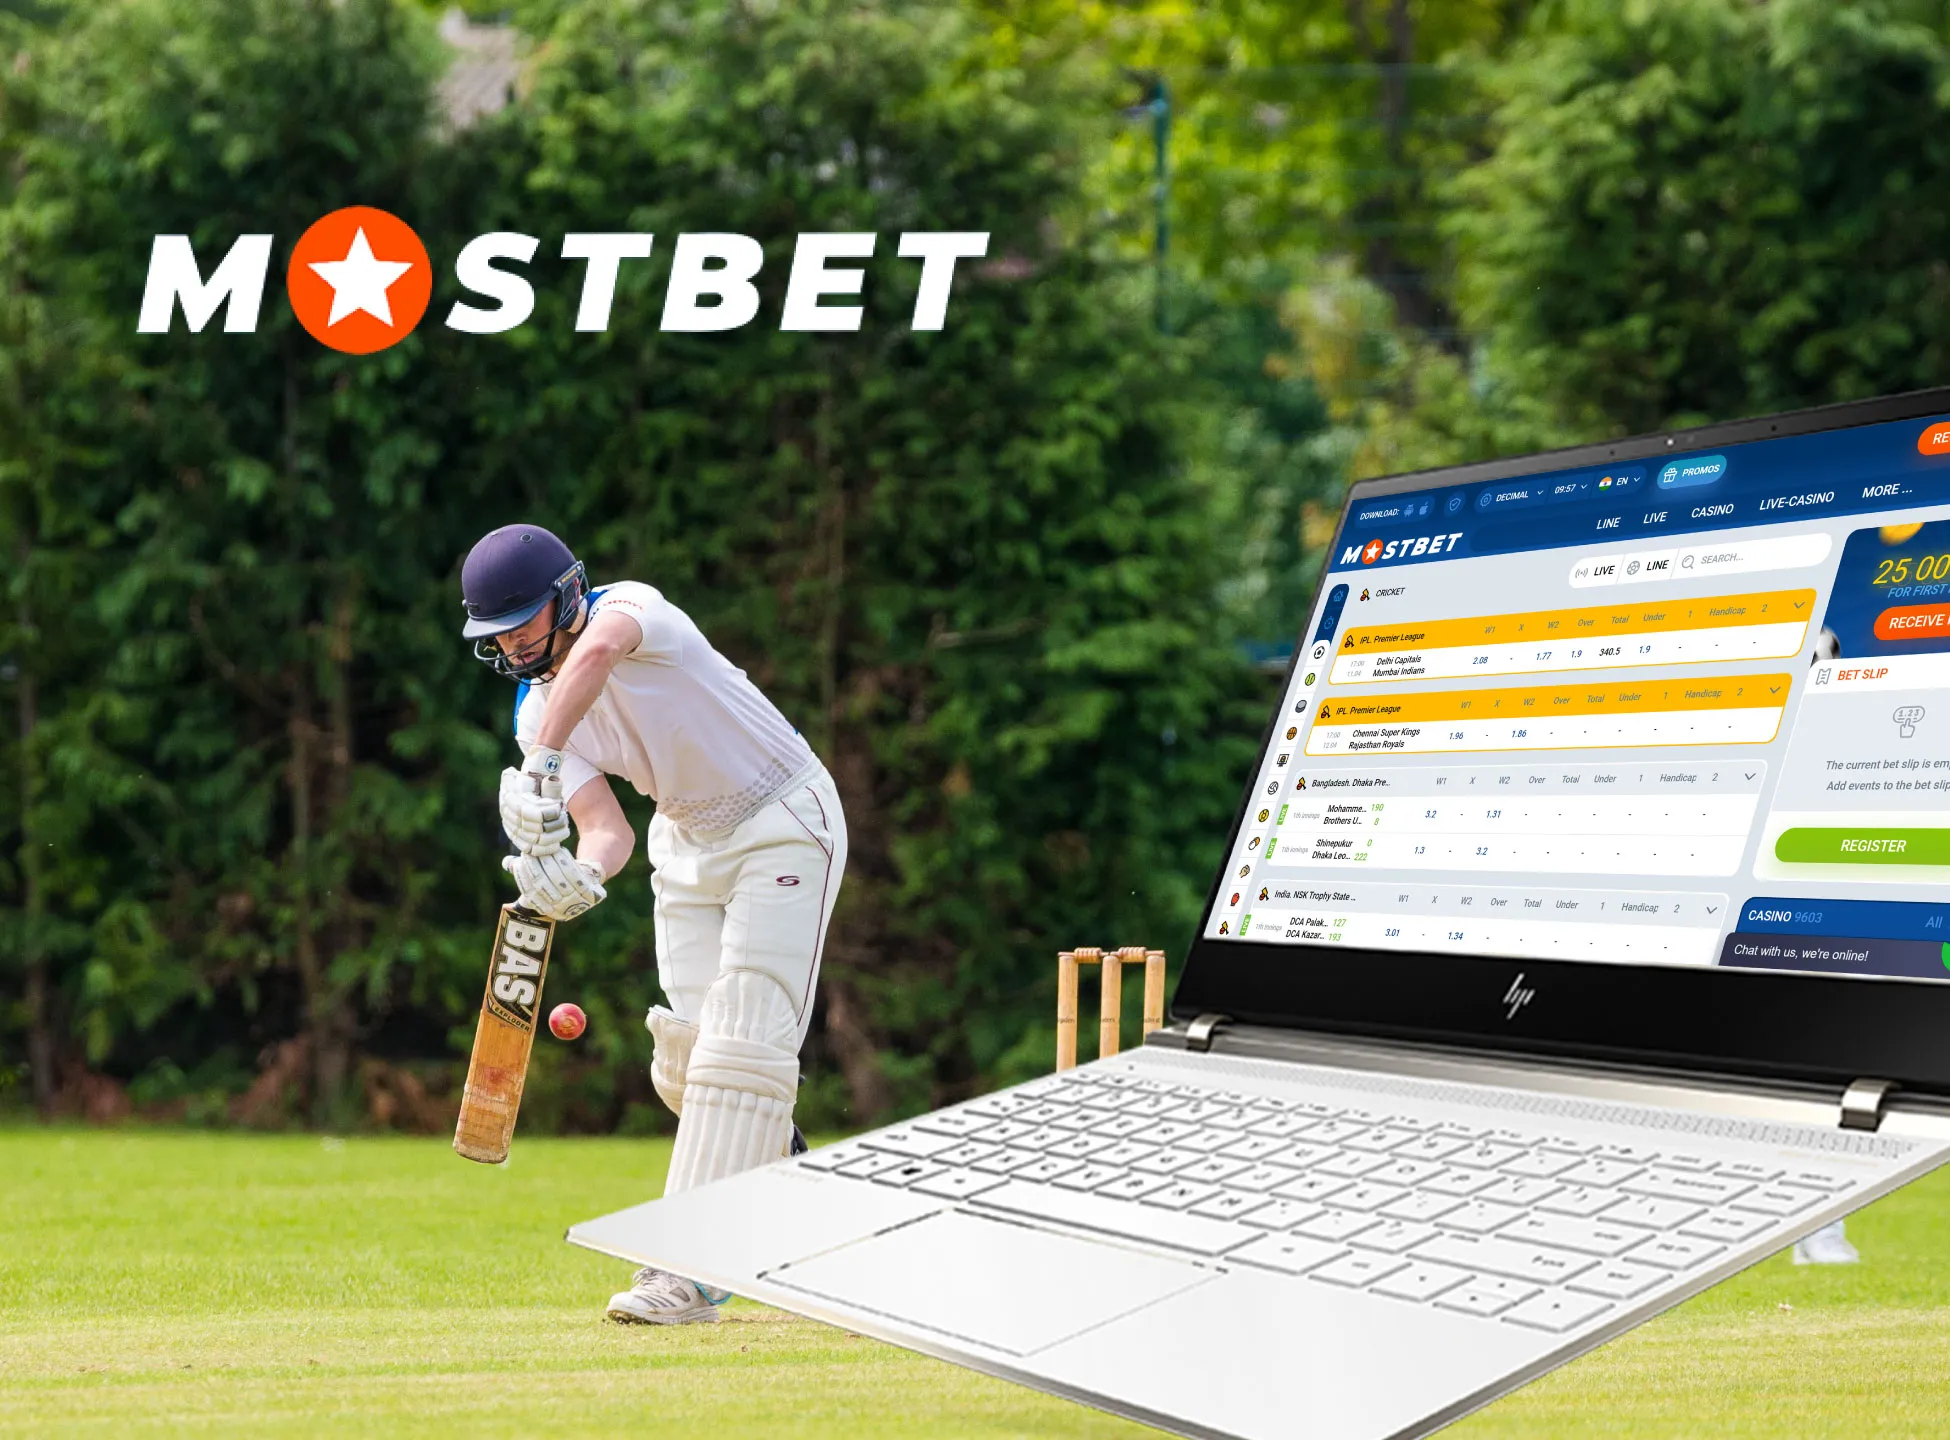 Enjoy the cricket betting in the Mostbet sportsbook.